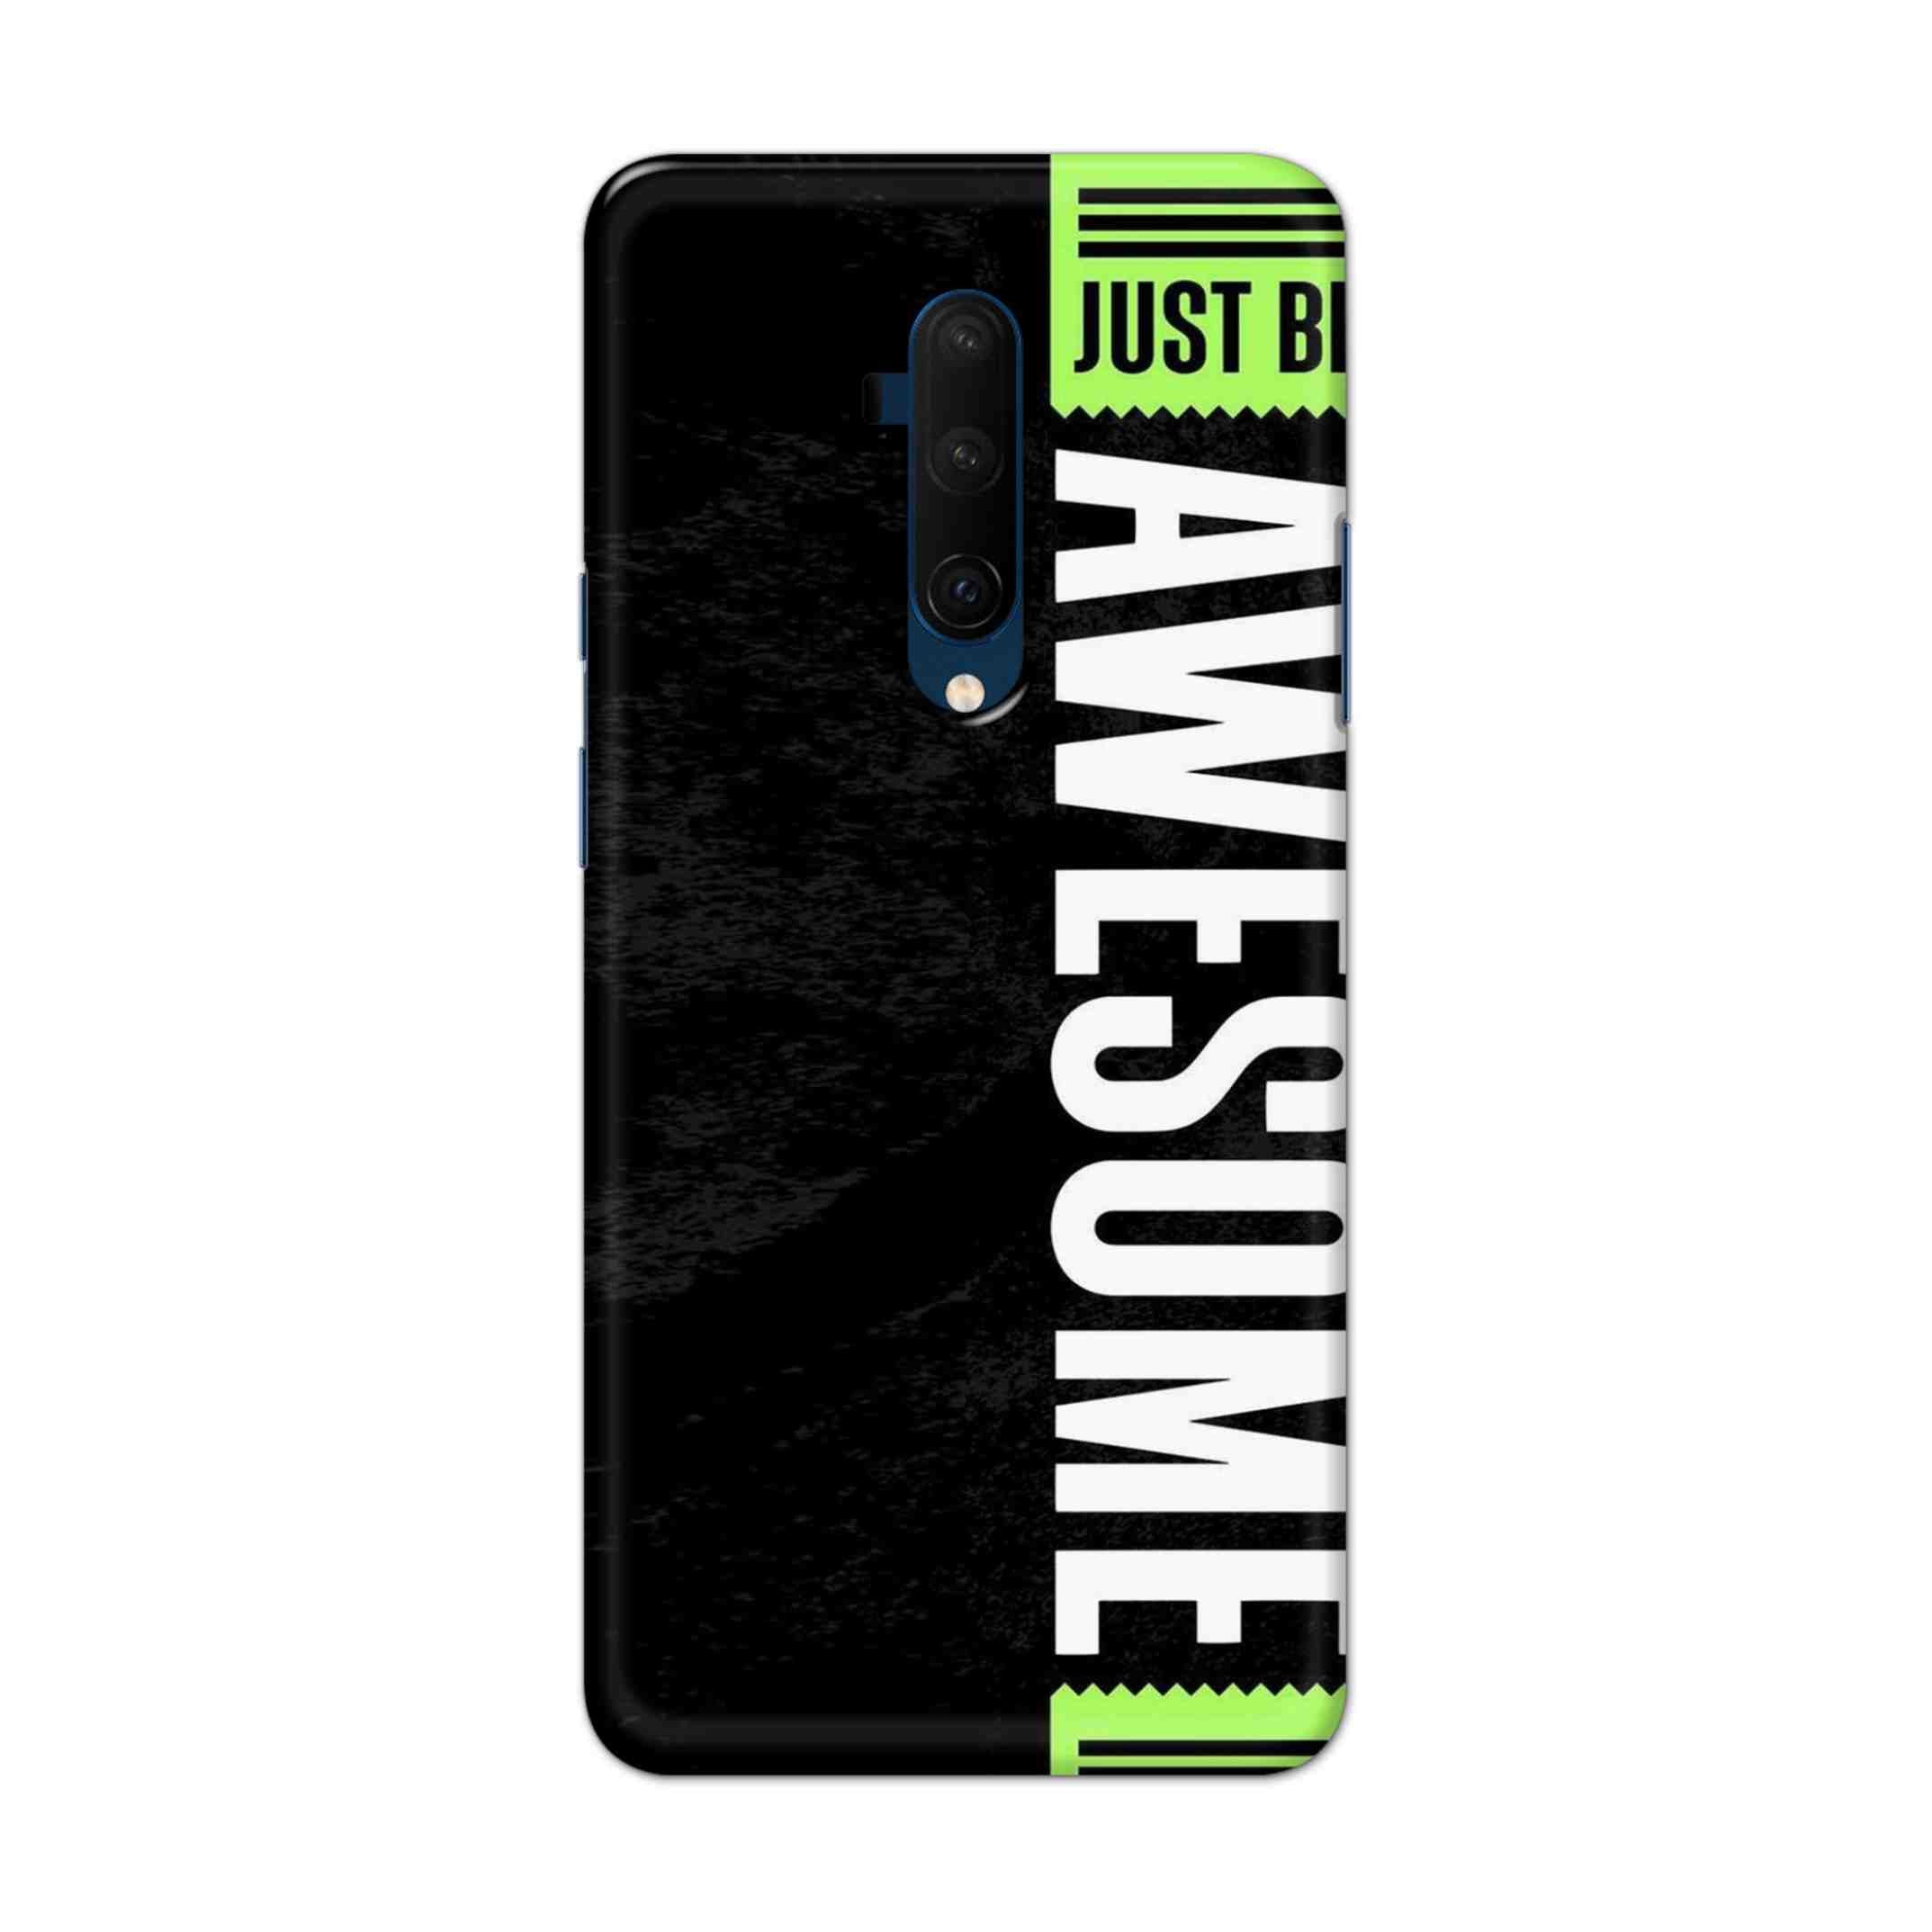 Buy Awesome Street Hard Back Mobile Phone Case Cover For OnePlus 7T Pro Online